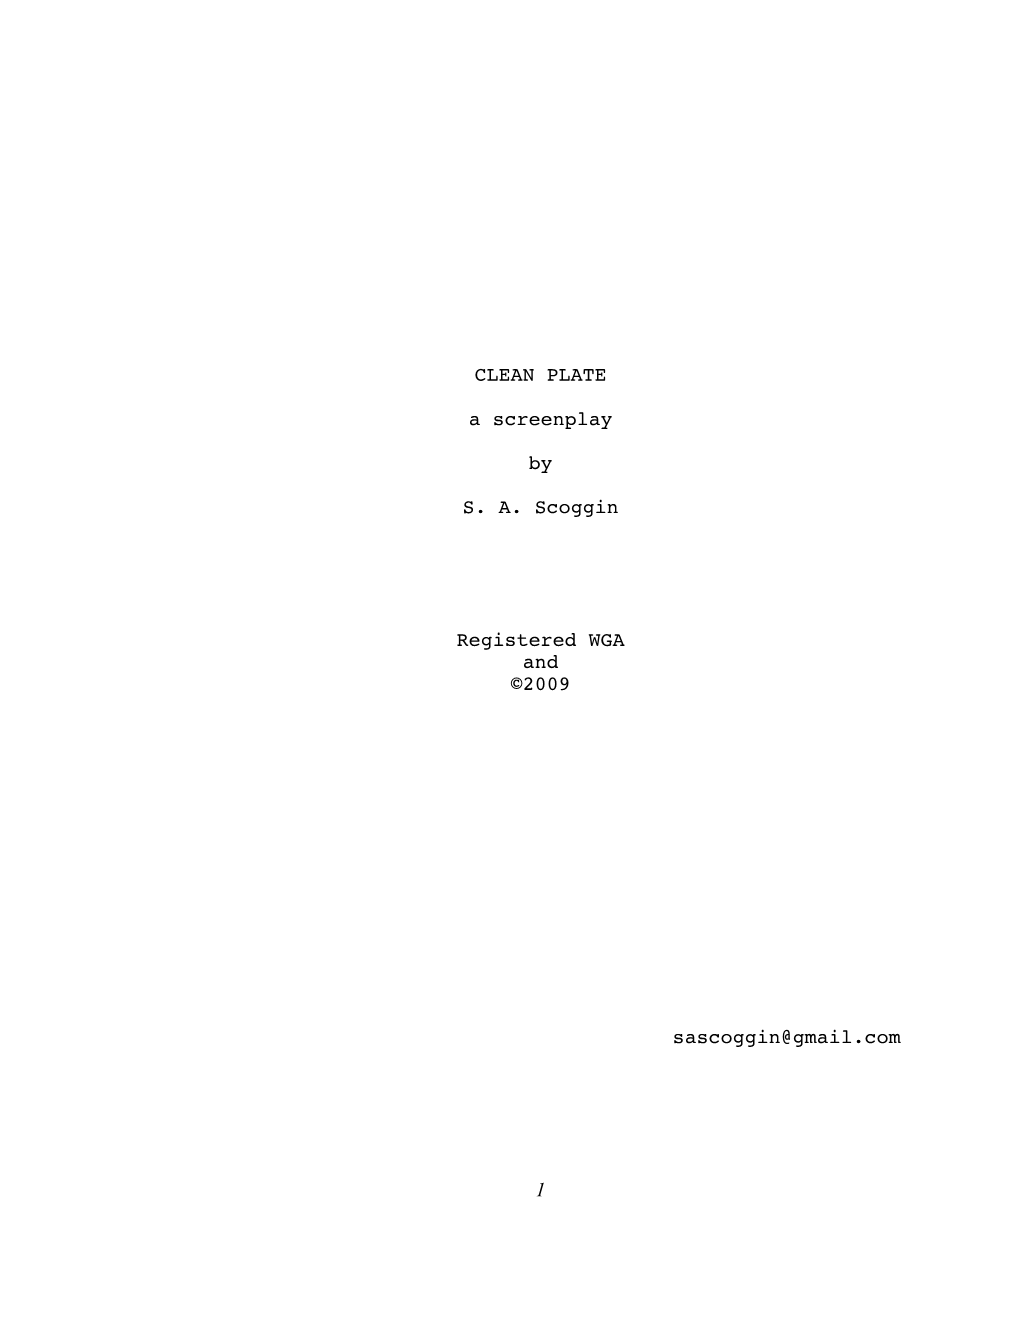 1 CLEAN PLATE a Screenplay by S. A. Scoggin Registered WGA And